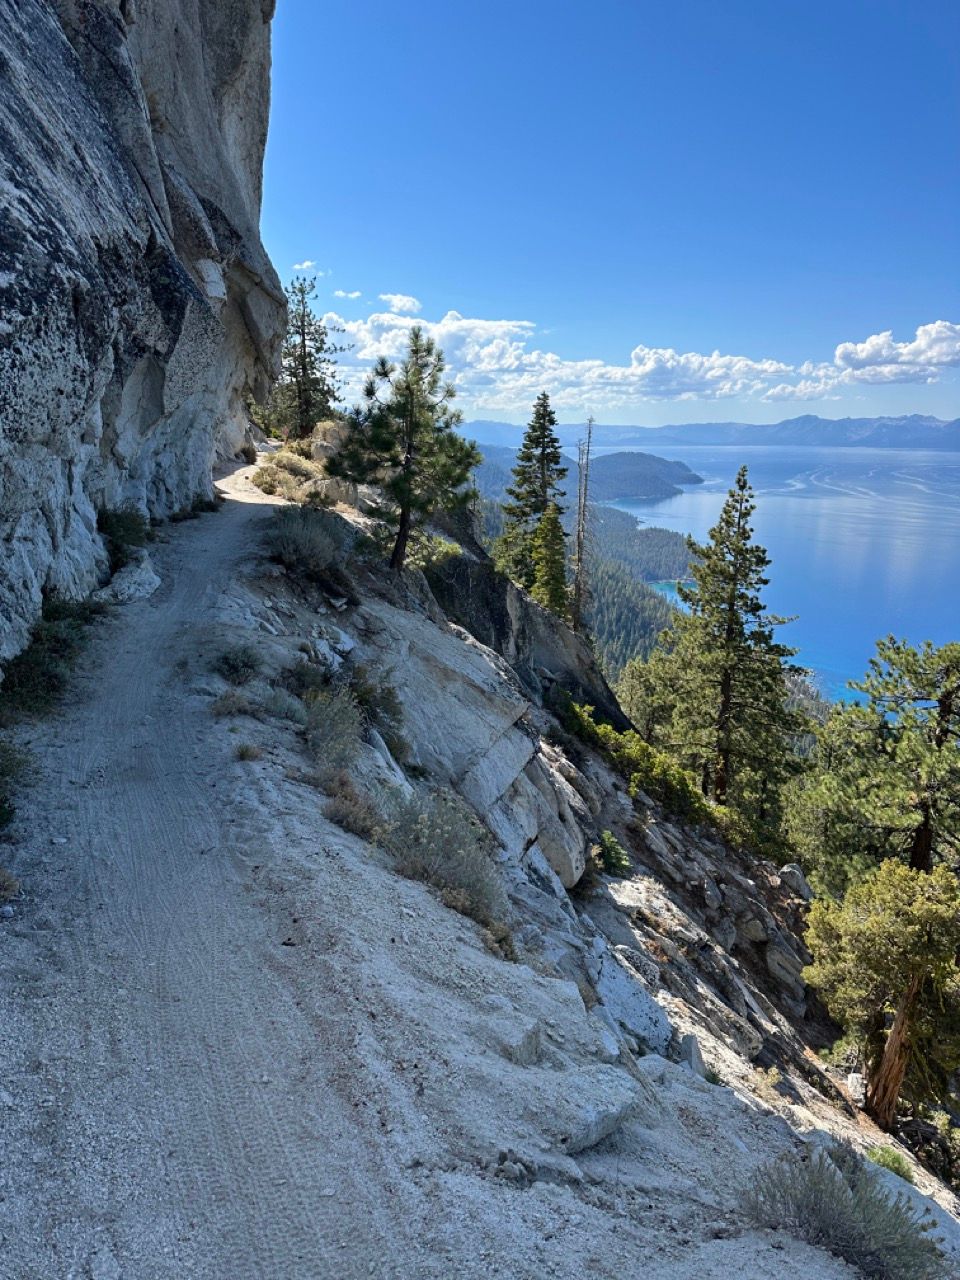 How to bikepack the Tahoe Rim Trail in 3 days